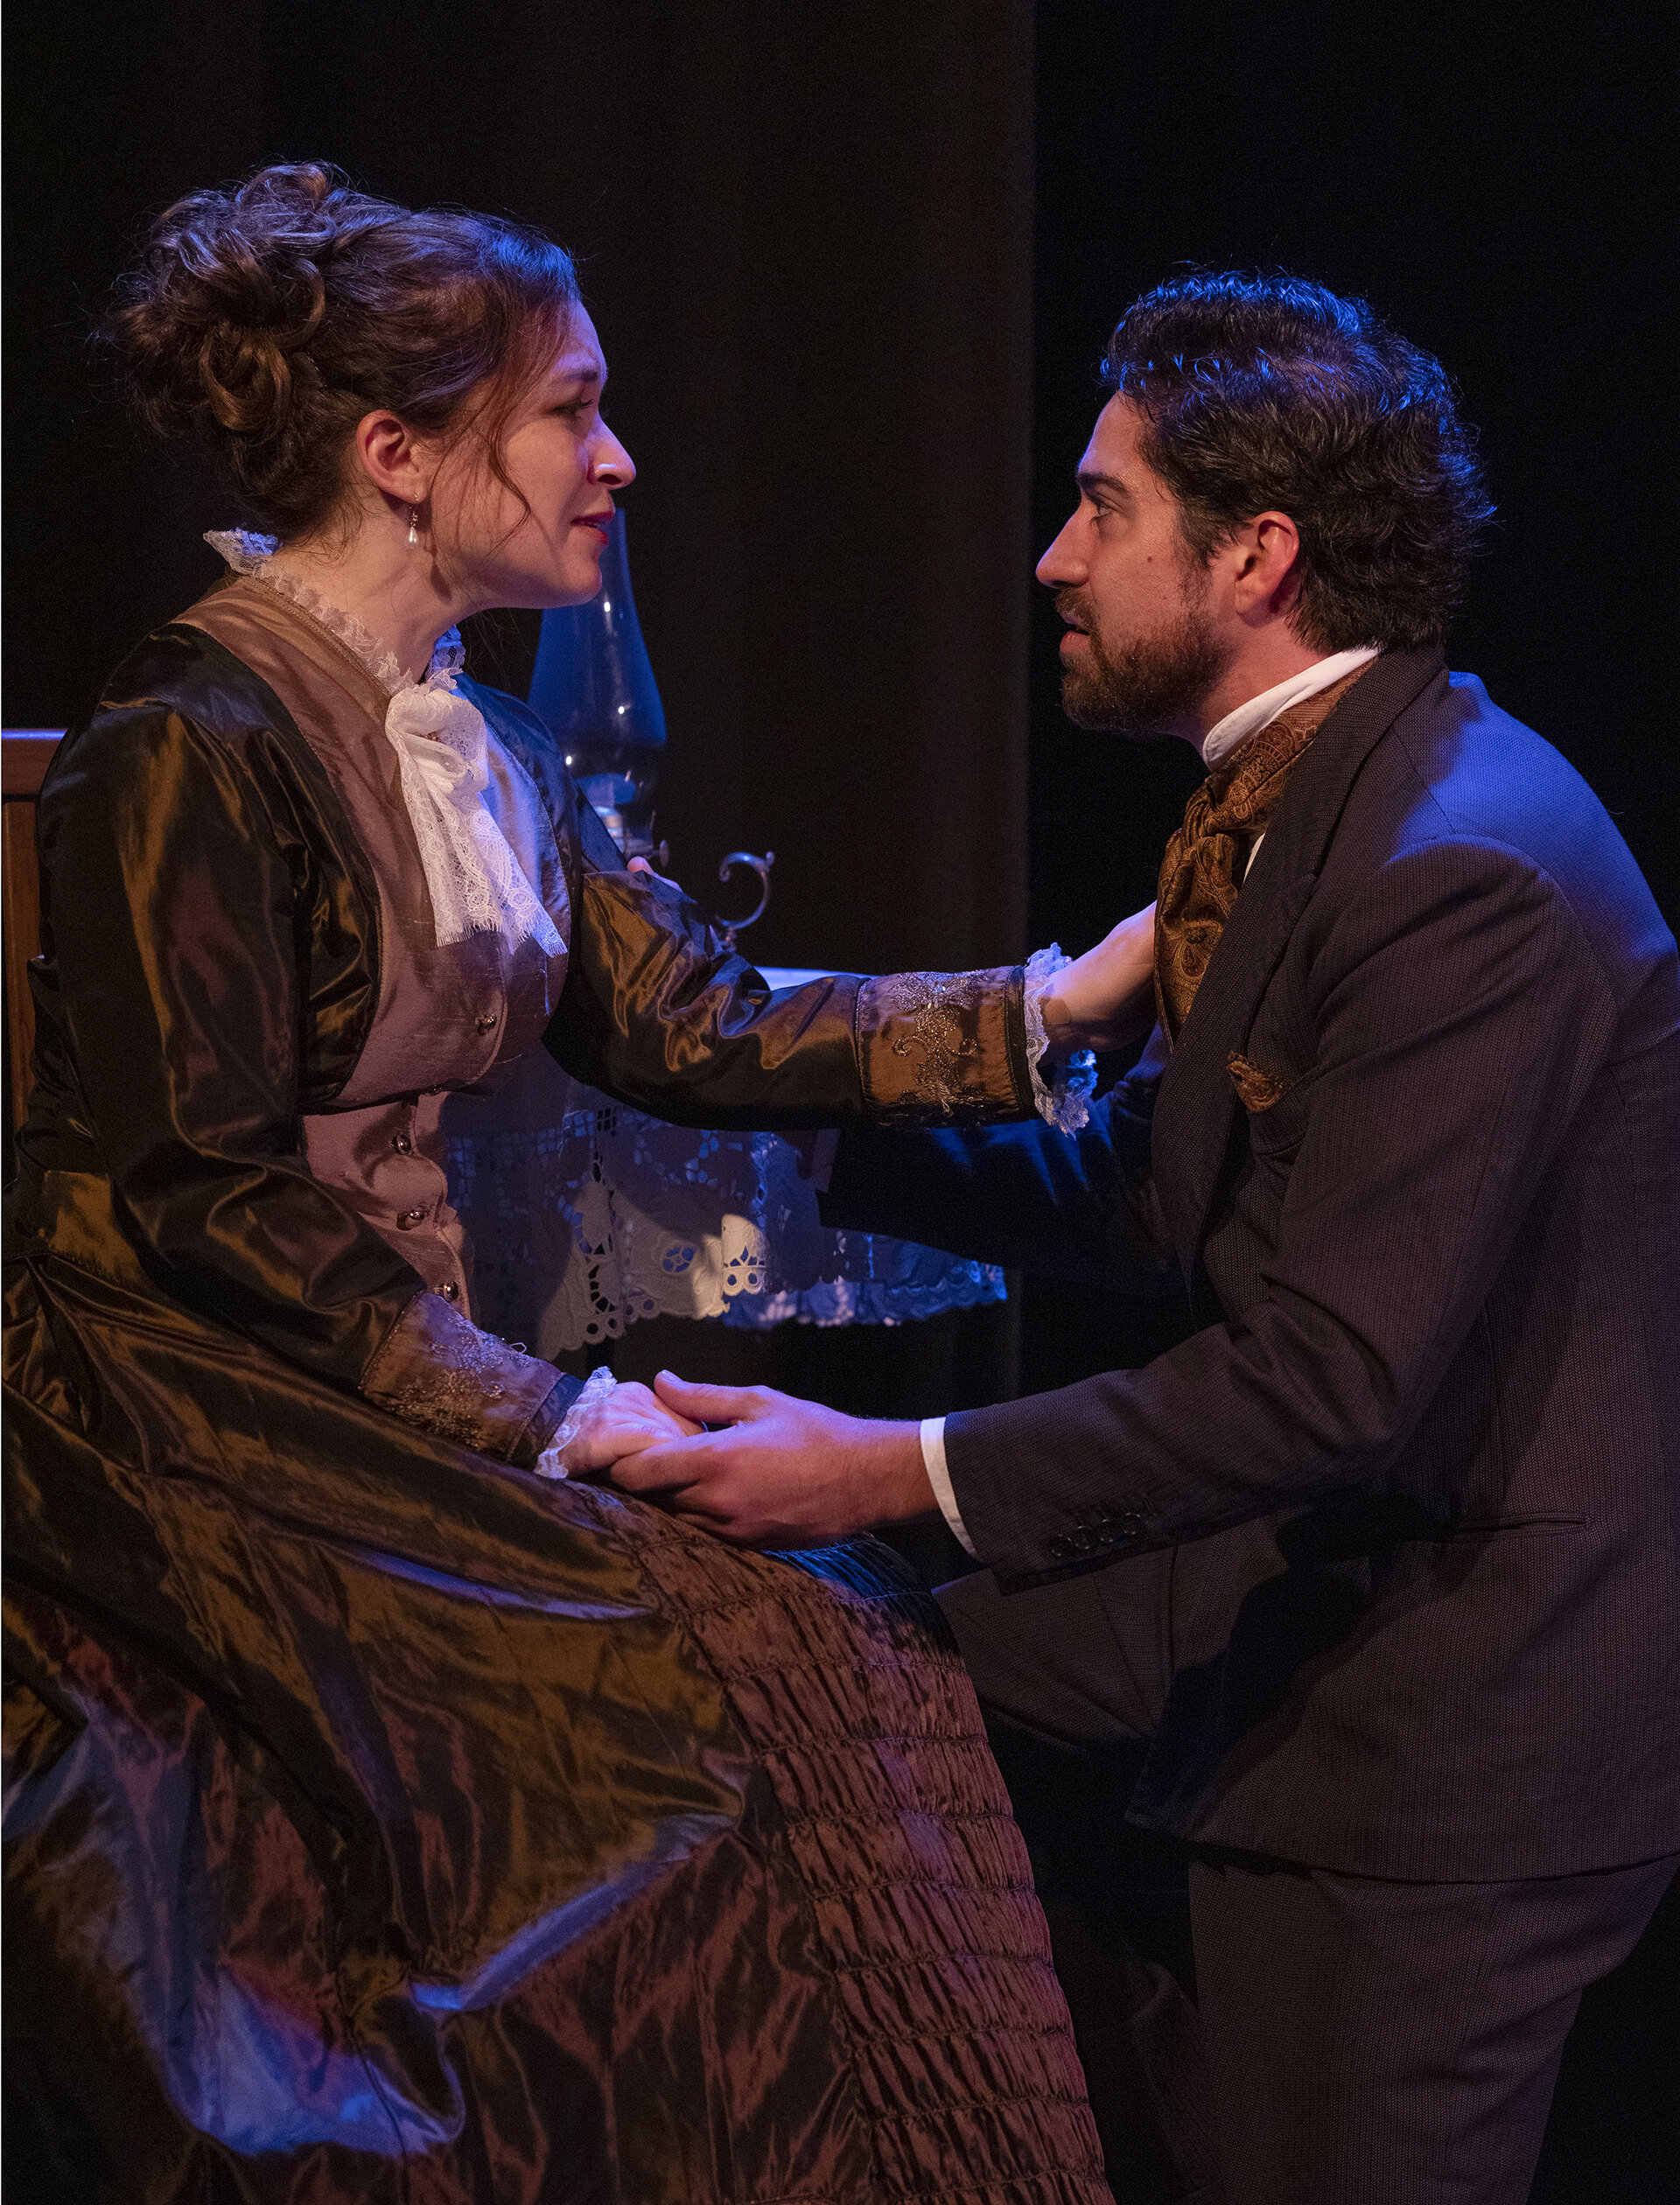 Bryn Booth as Edna Pontellier and Hunter Hnat as Robert LeBrun. Photo by Tim Fuller.